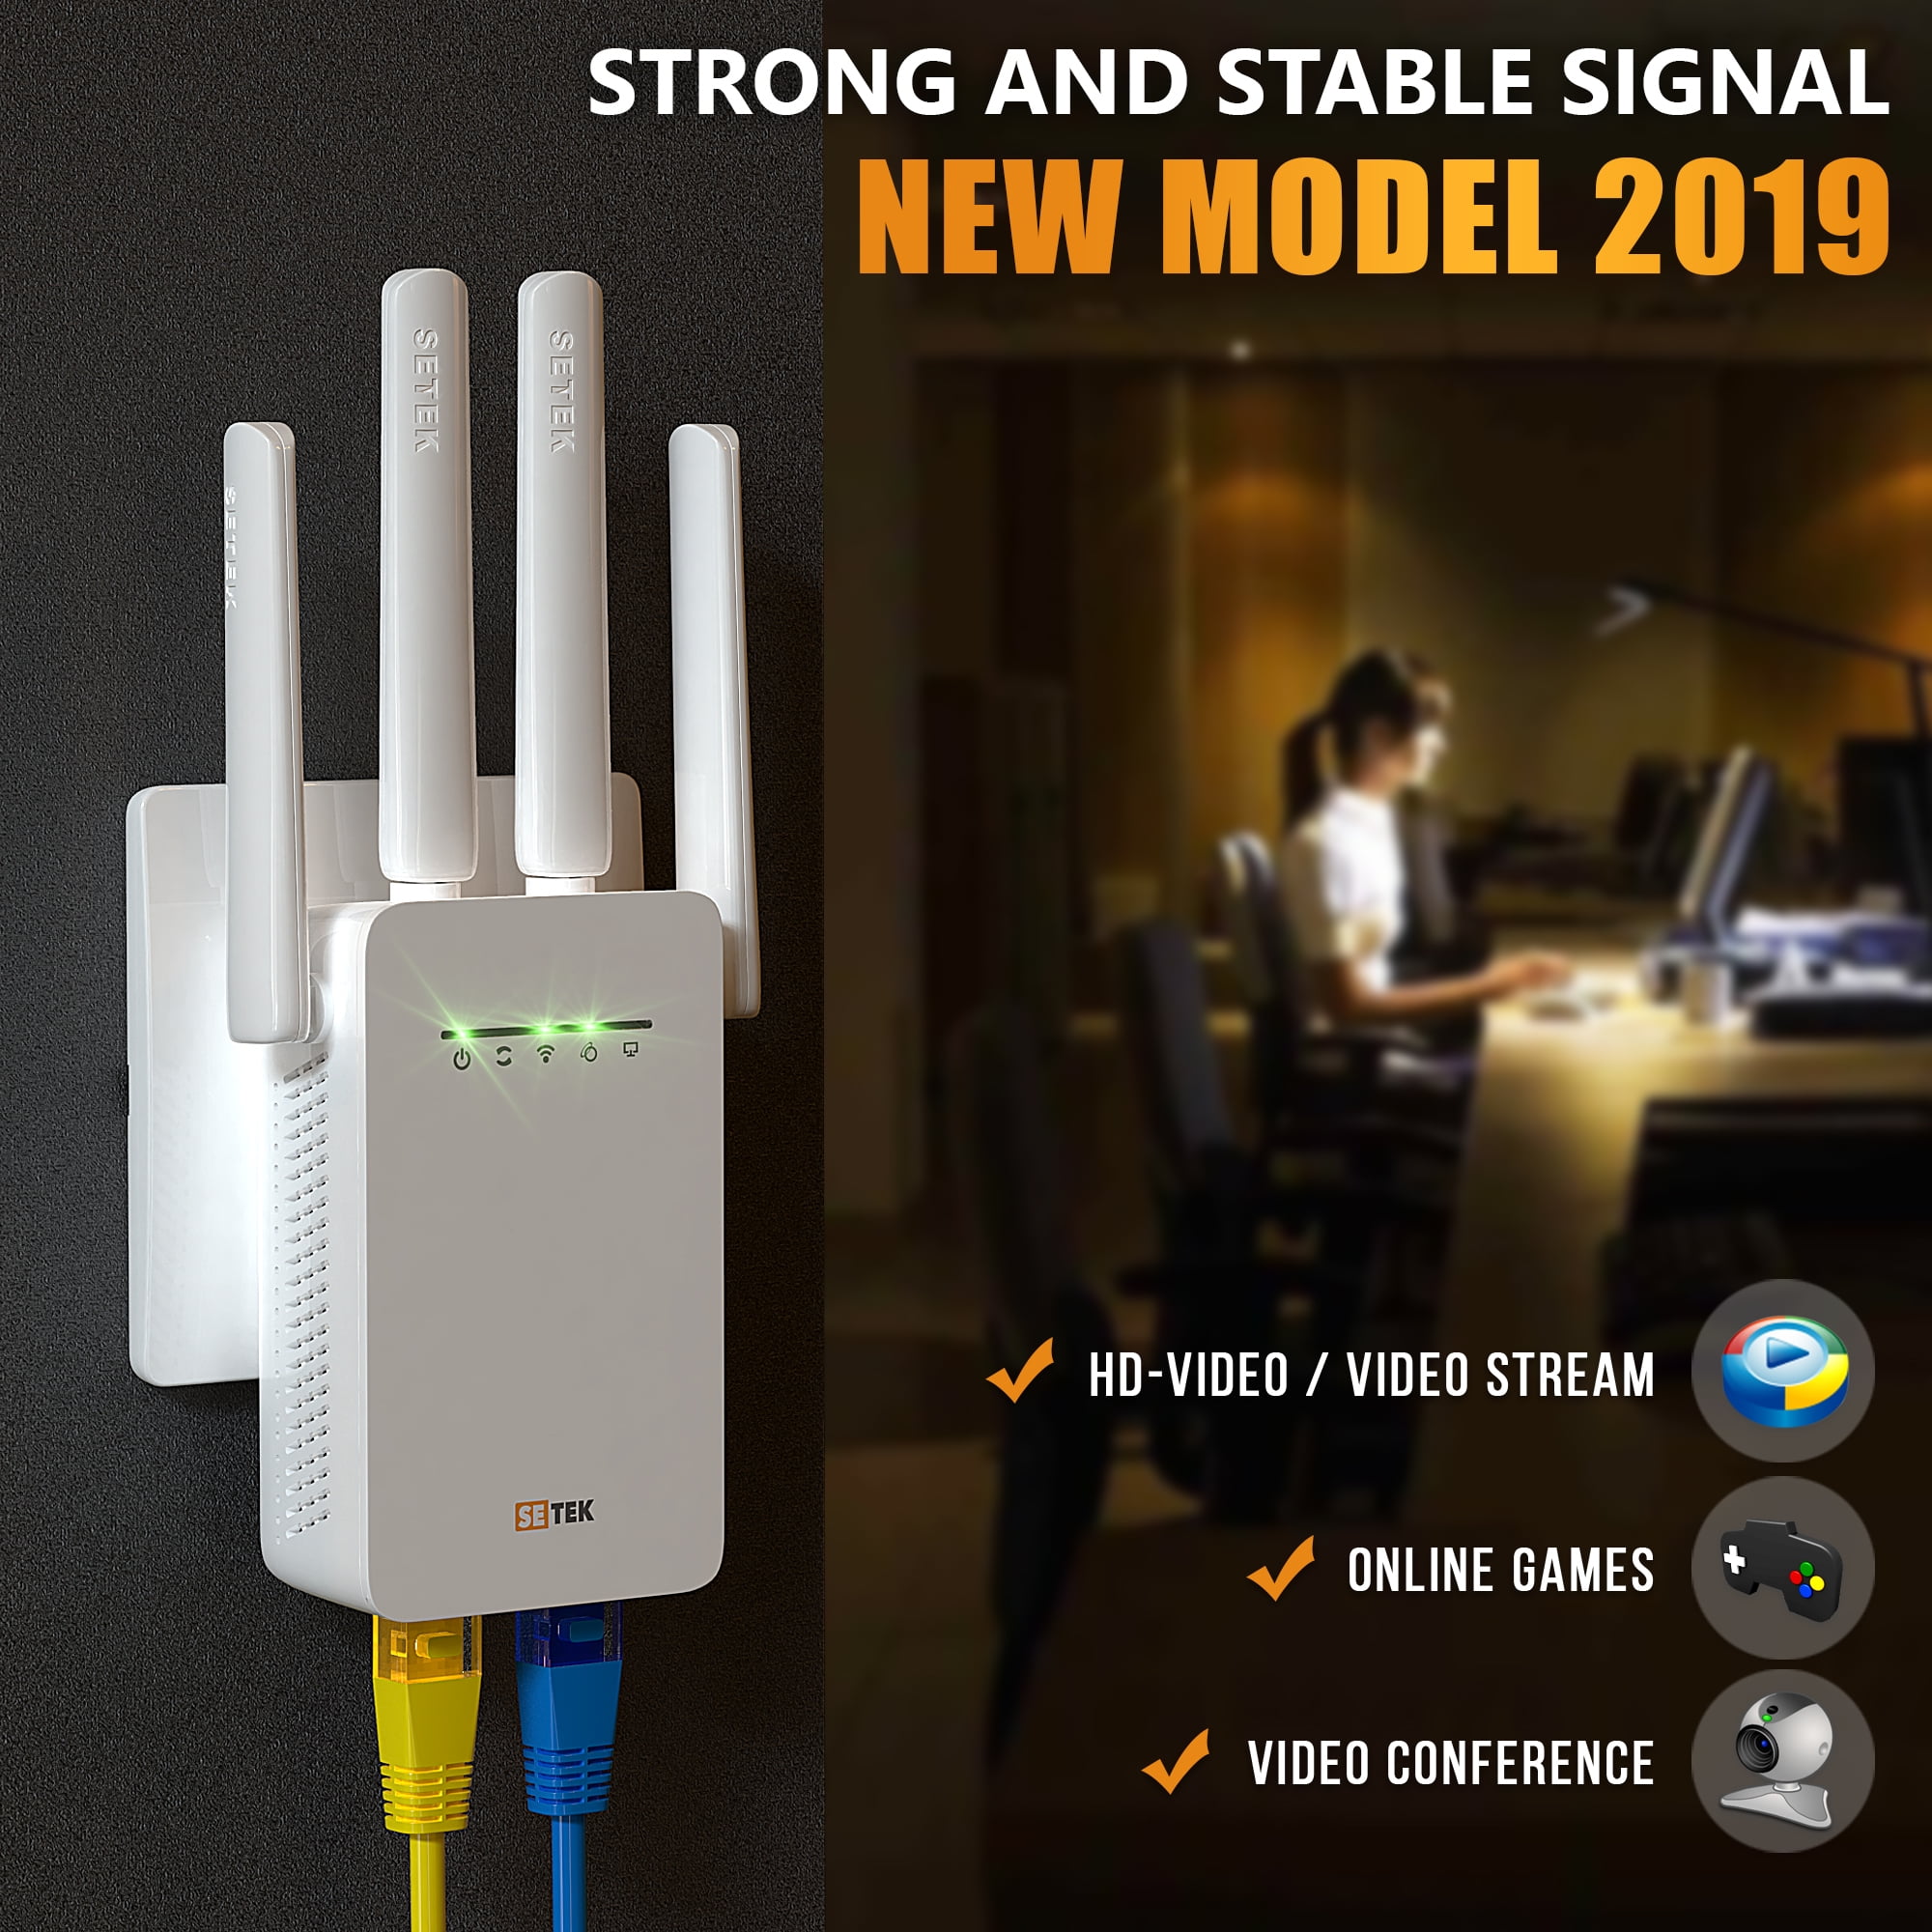 SETEK WiFi Range Signal Booster to 2500 Feet, 300 MBPS Wireless Internet Amplifier - Covers 15 Devices with 4 External Working Modes, Overvoltage Protection, LAN/Ethernet Port - Walmart.com